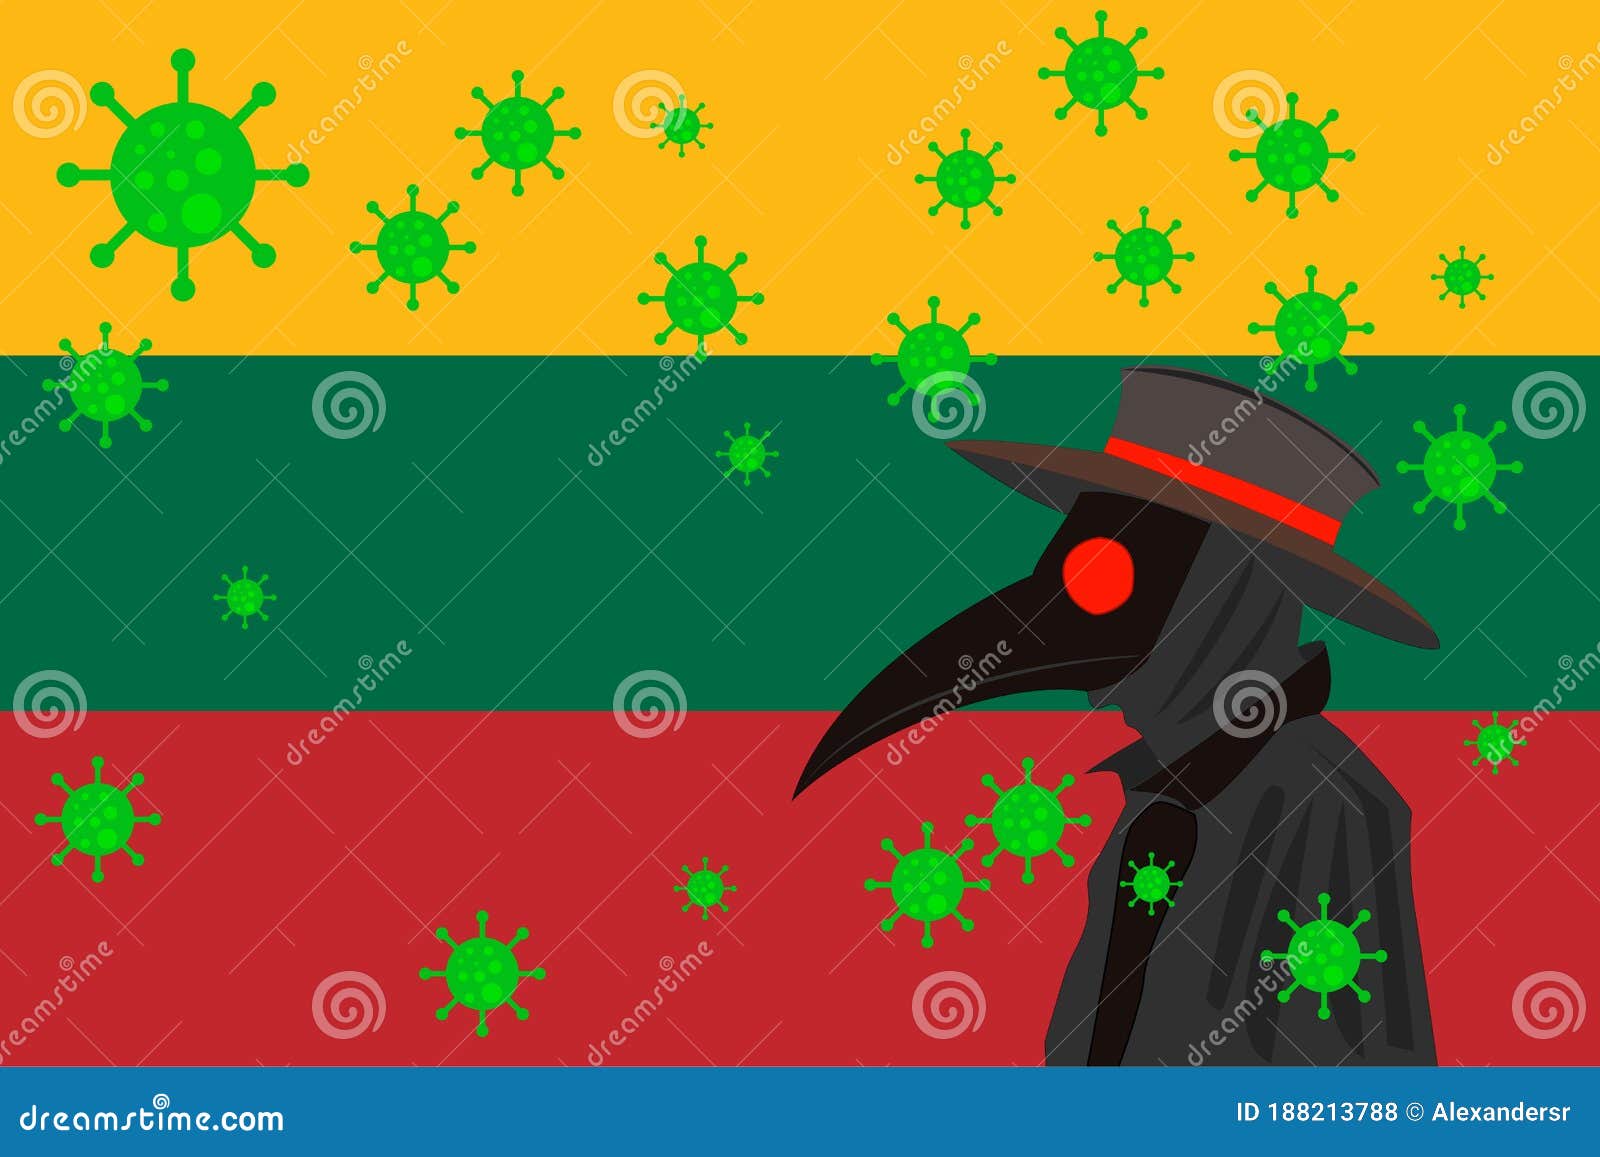 black plague doctor surrounded by viruses with copy space with lituania flag